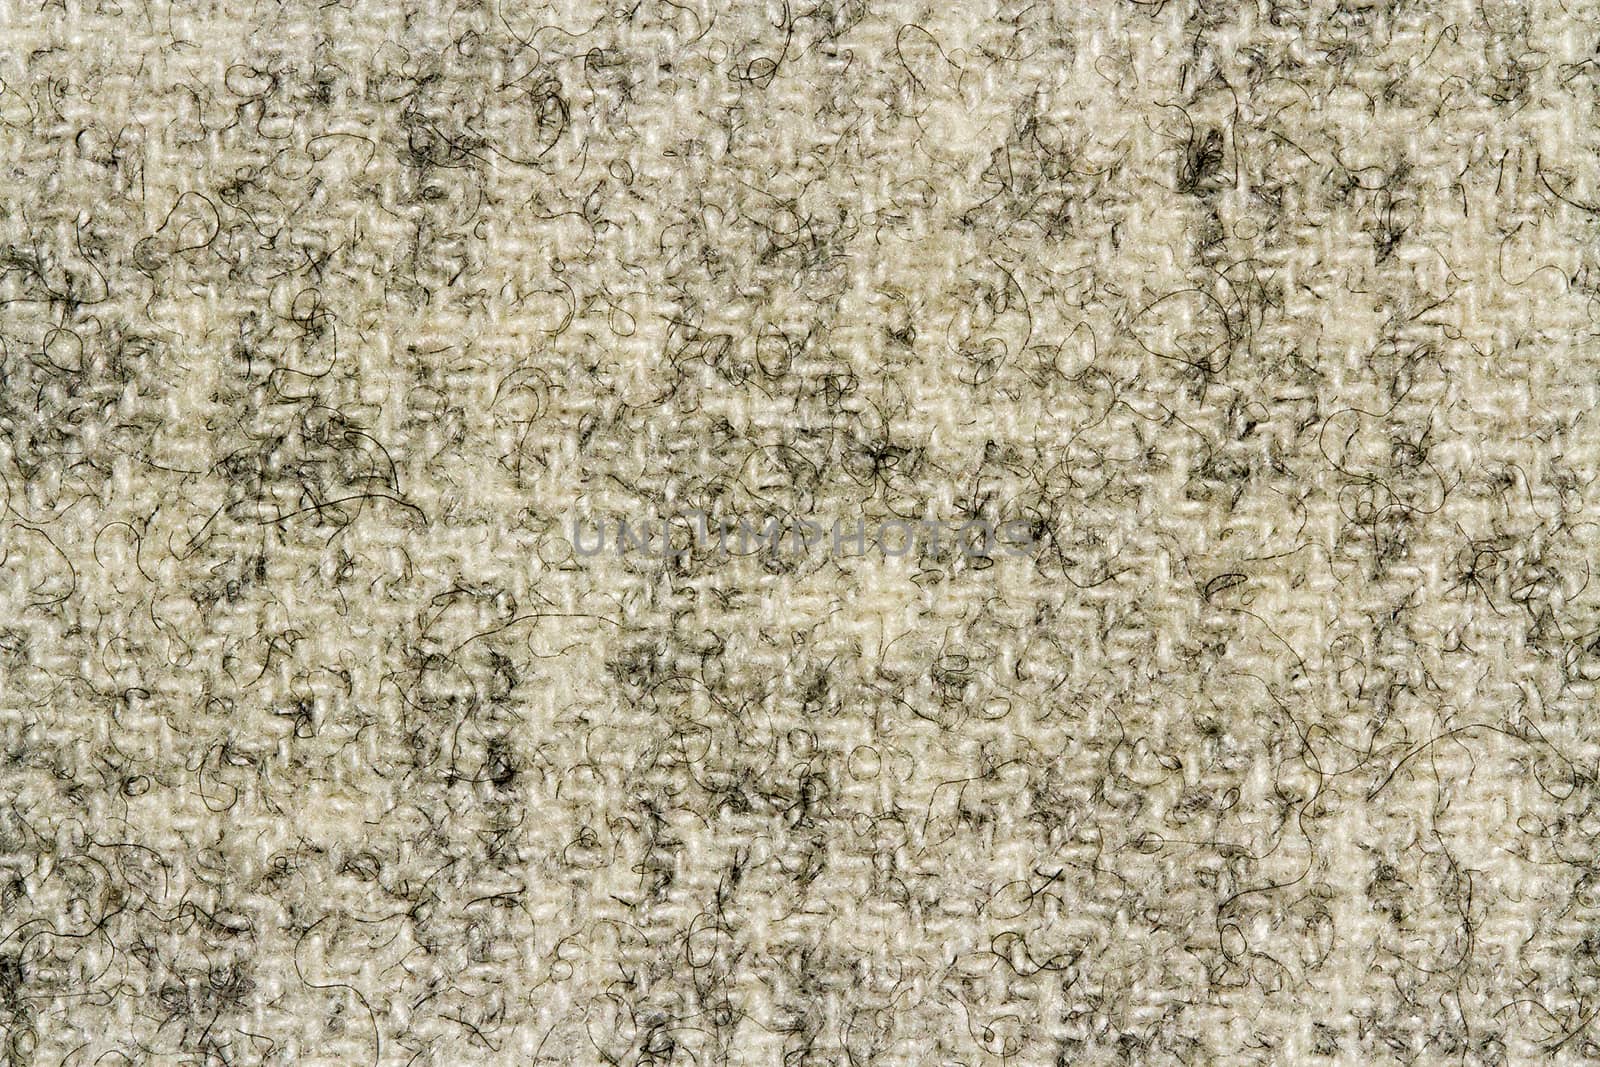 Brown carpet texture for the background for text area by TakerWalker